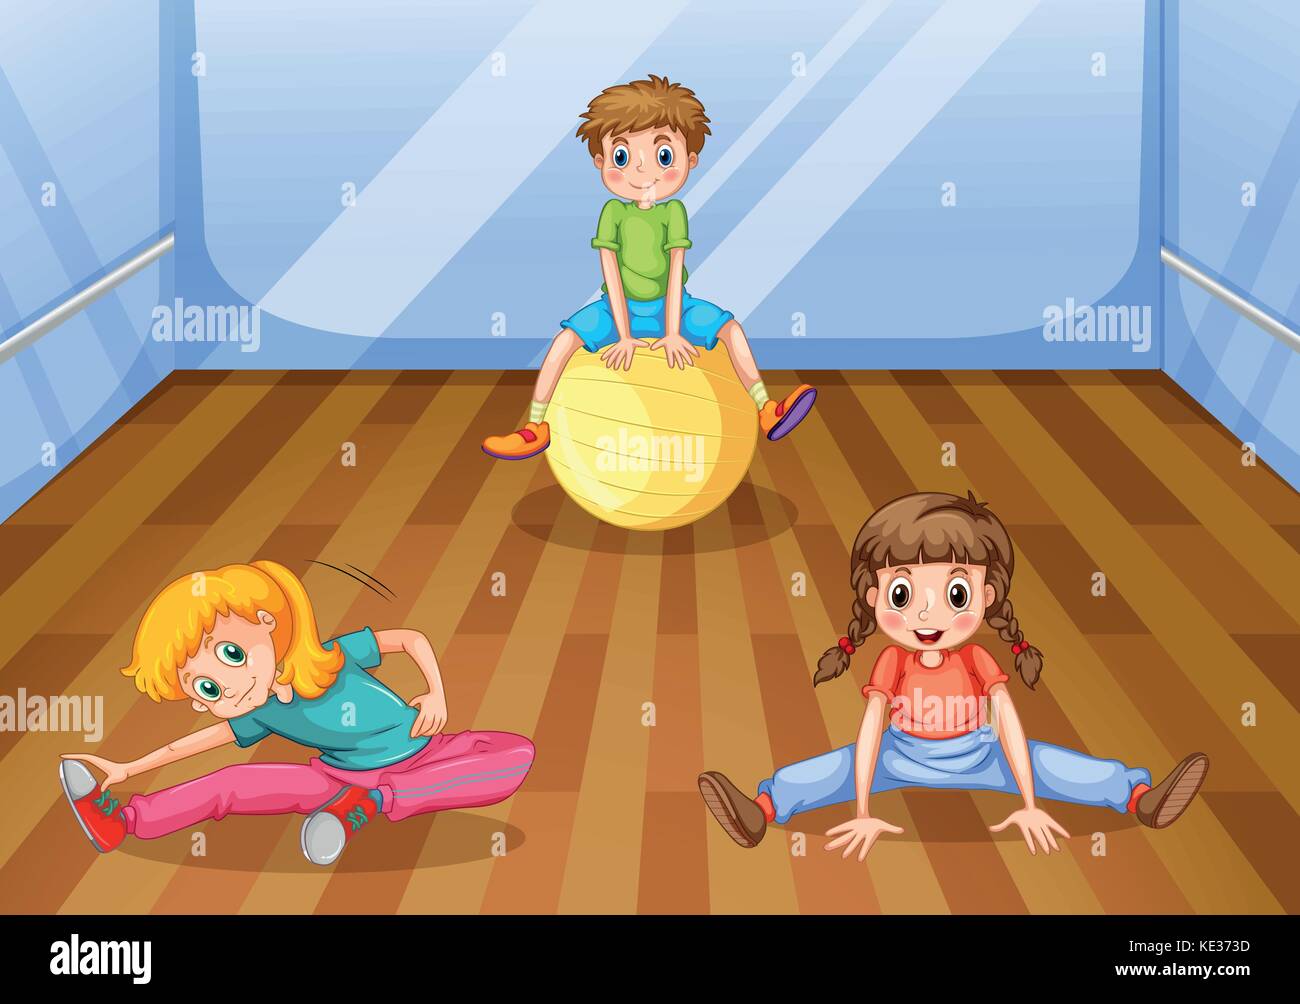 129,743 Children Exercise Cartoon Royalty-Free Photos and Stock Images